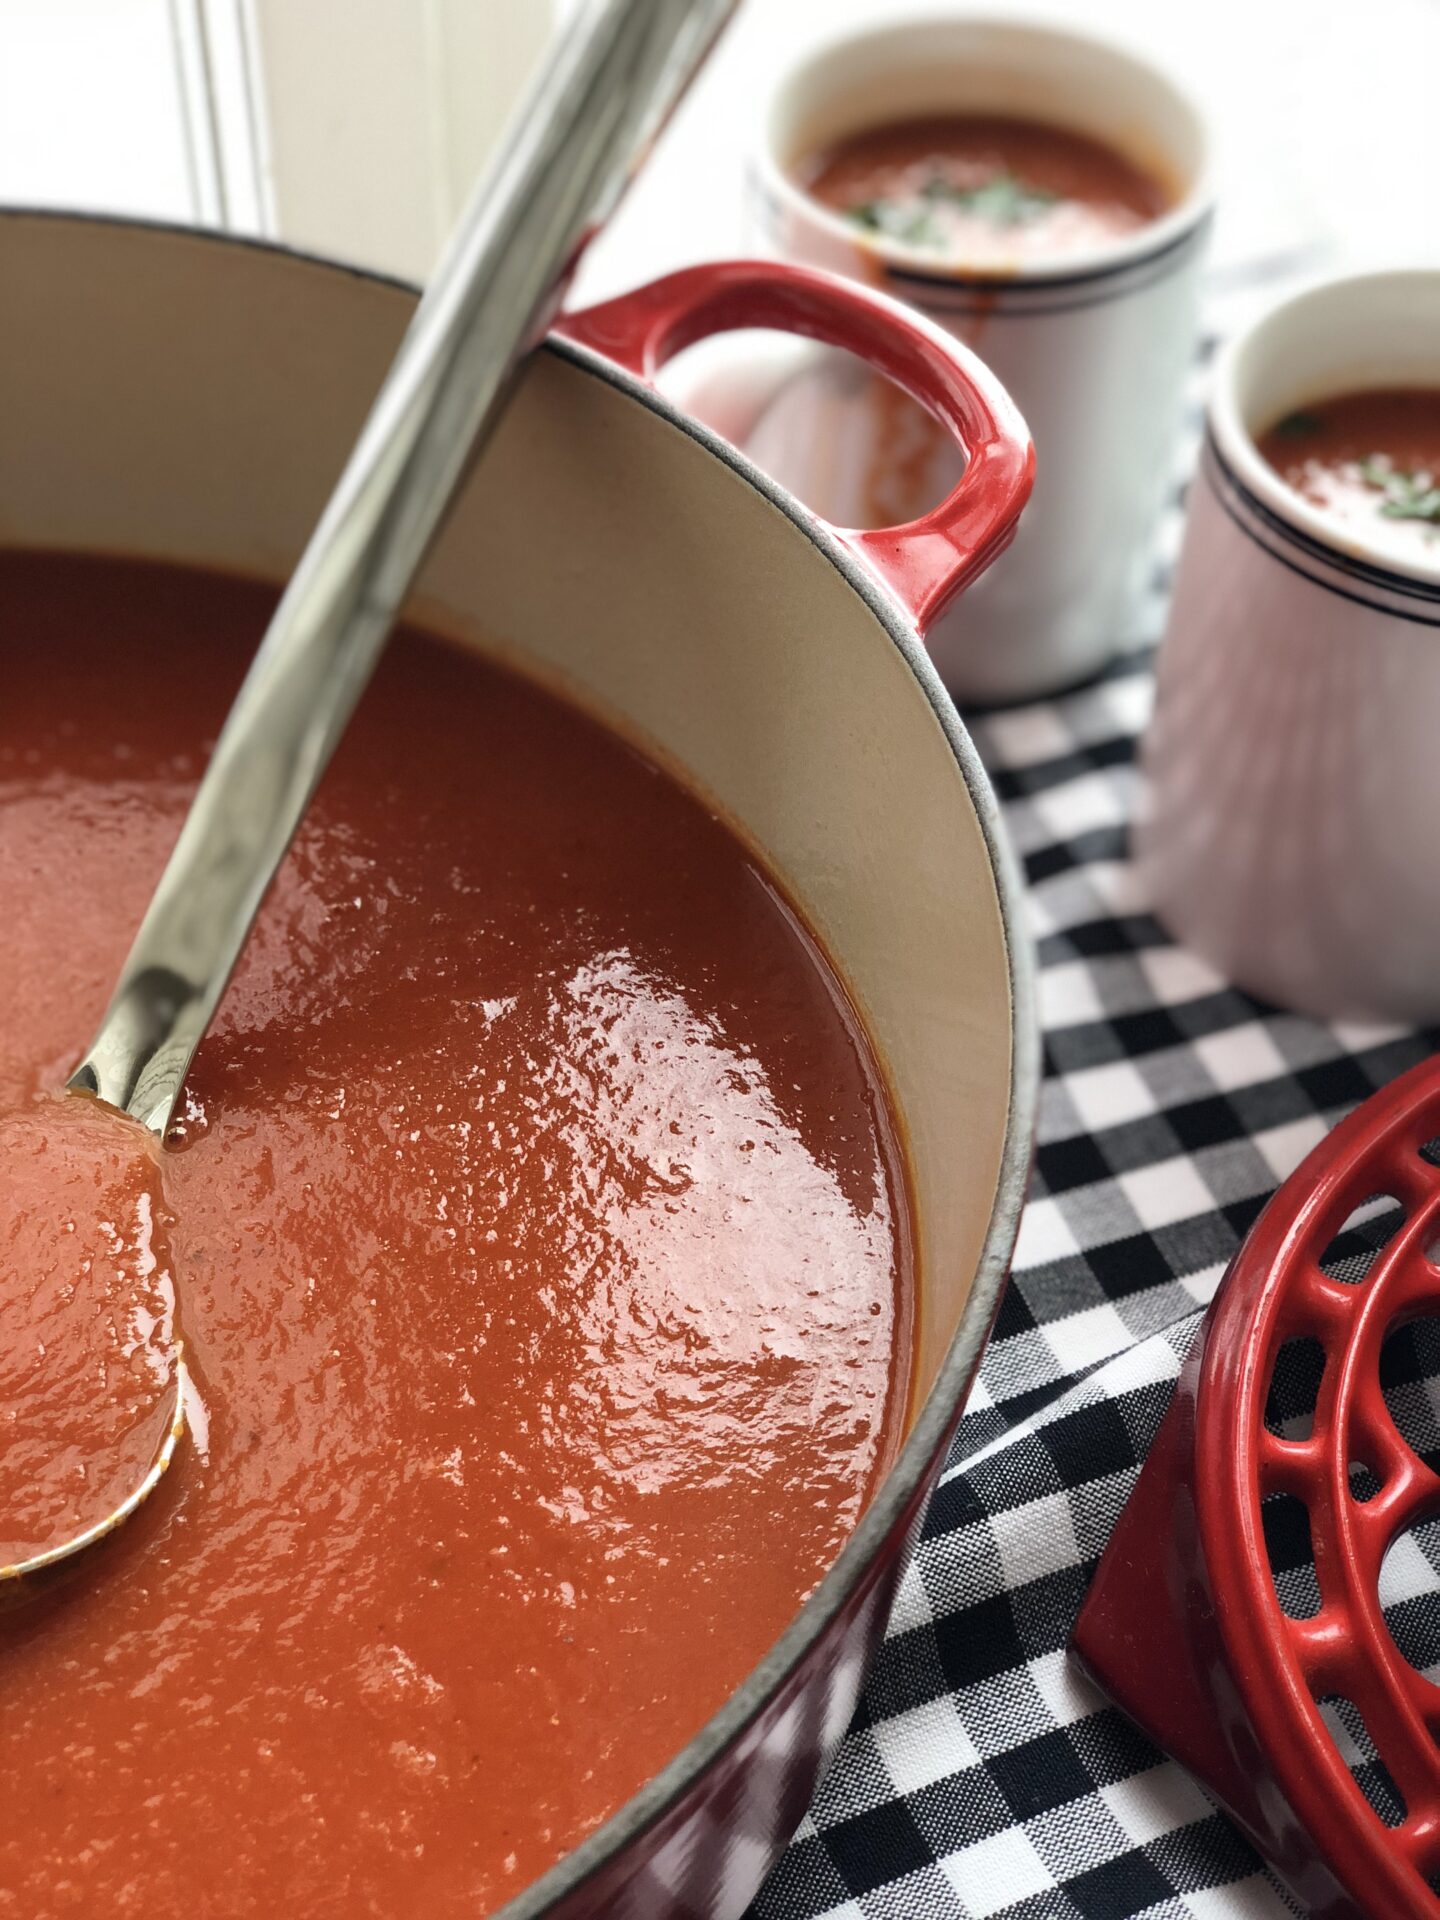 A large pot of homemade tomato soup seen from above, with a ladle and mugs for serving